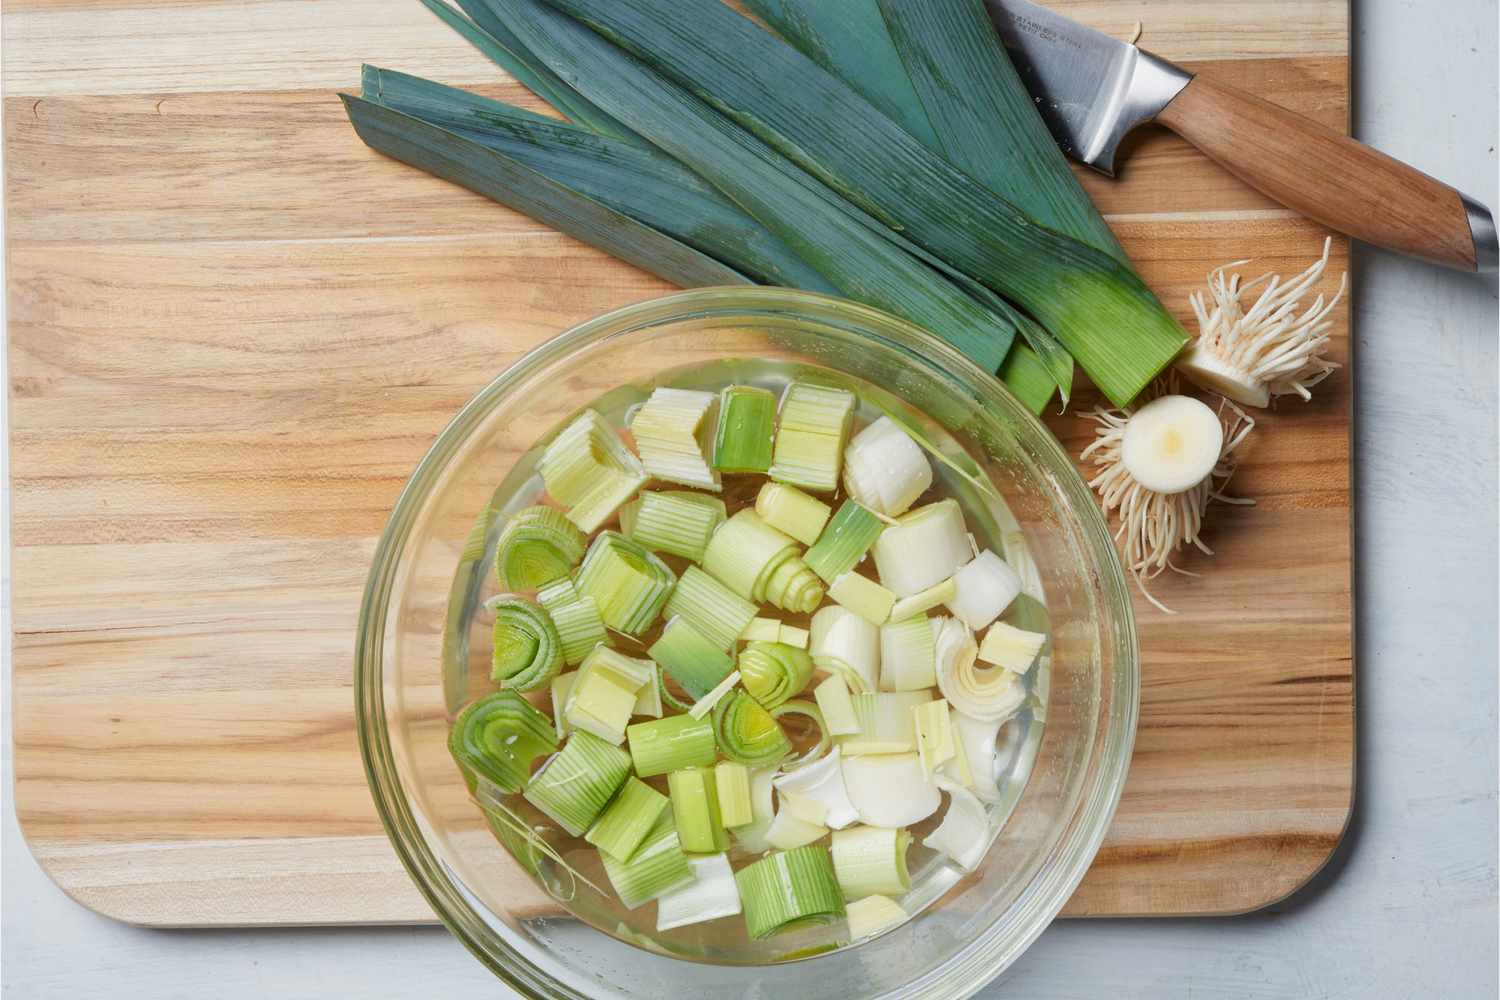 leeks on cutting board with sliced leeks in water bowl